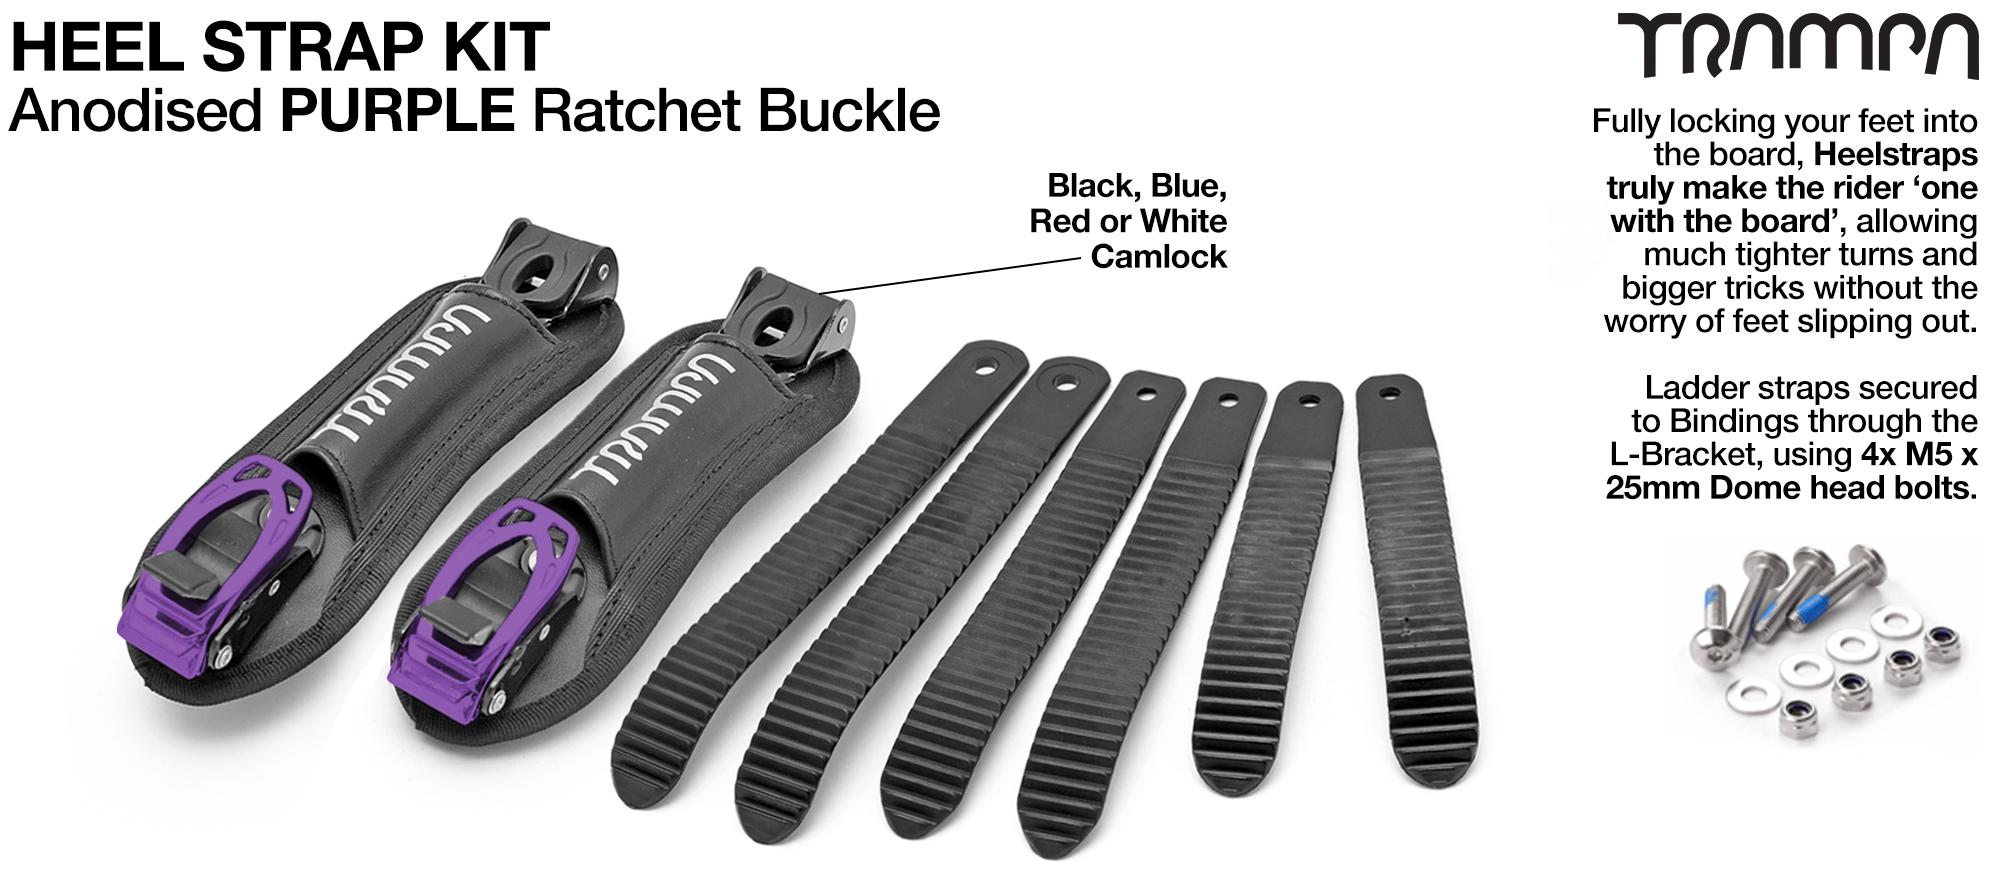 Heel Straps with PURPLE Ratchets